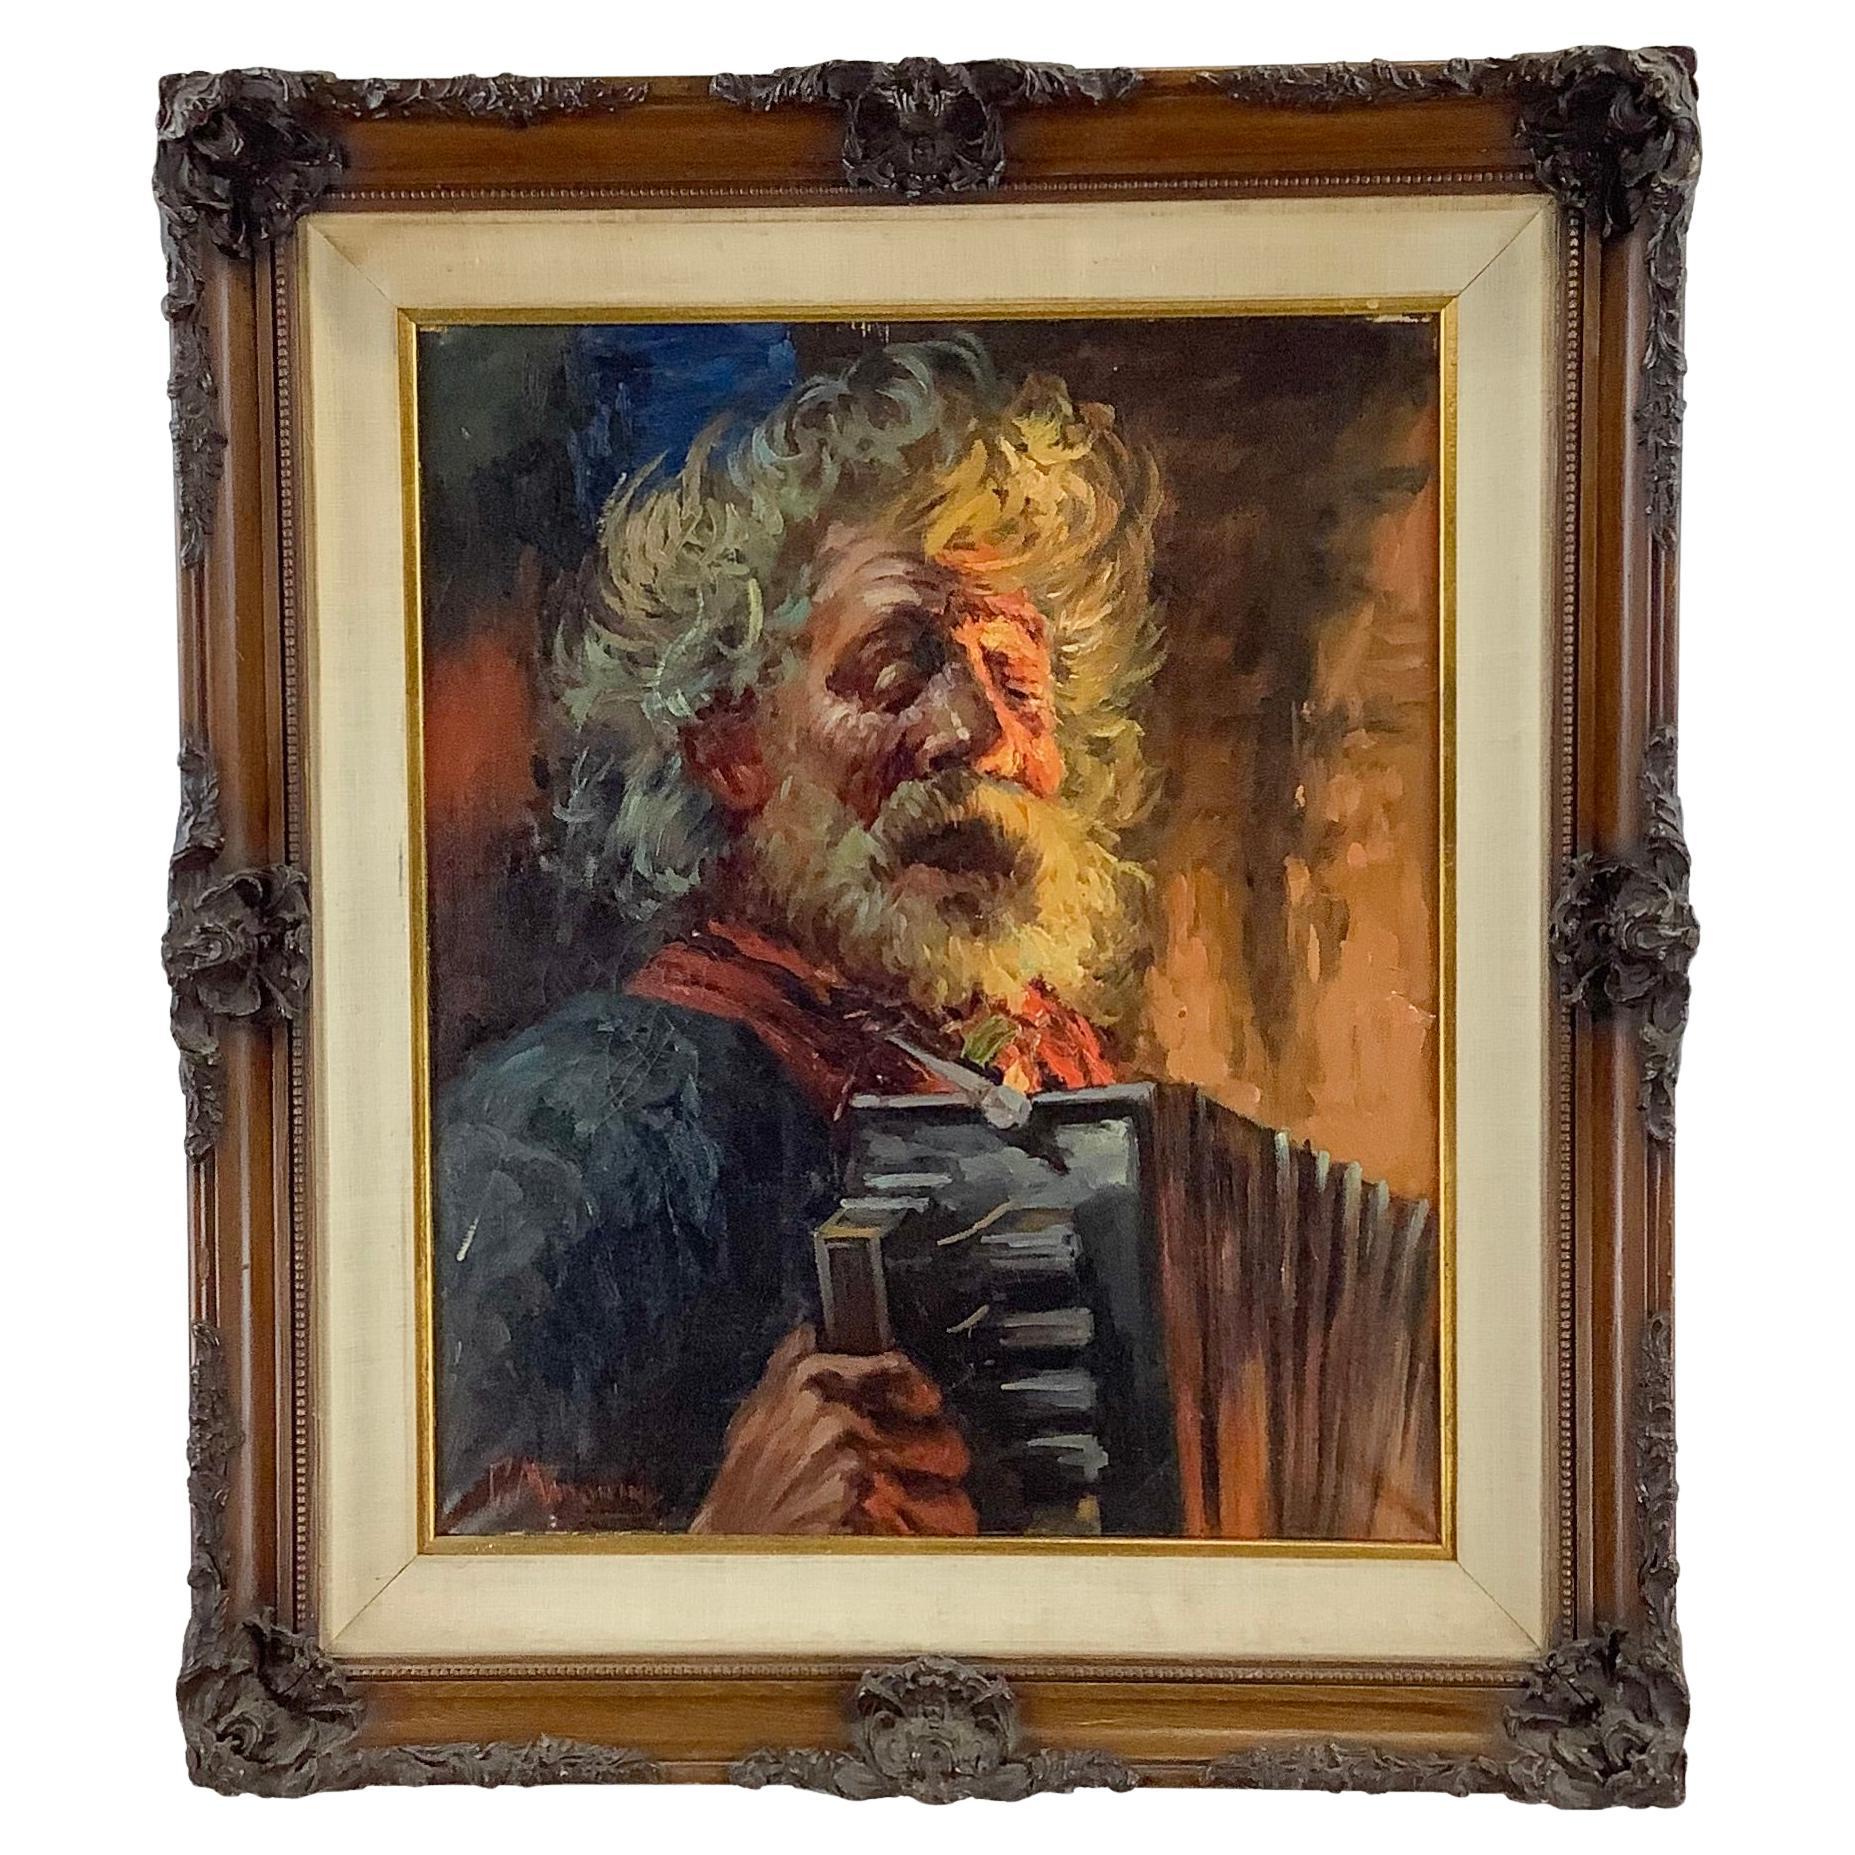 Vintage "Accordion Player" Oil on Canvas Impressionist Painting by G. Madonini For Sale